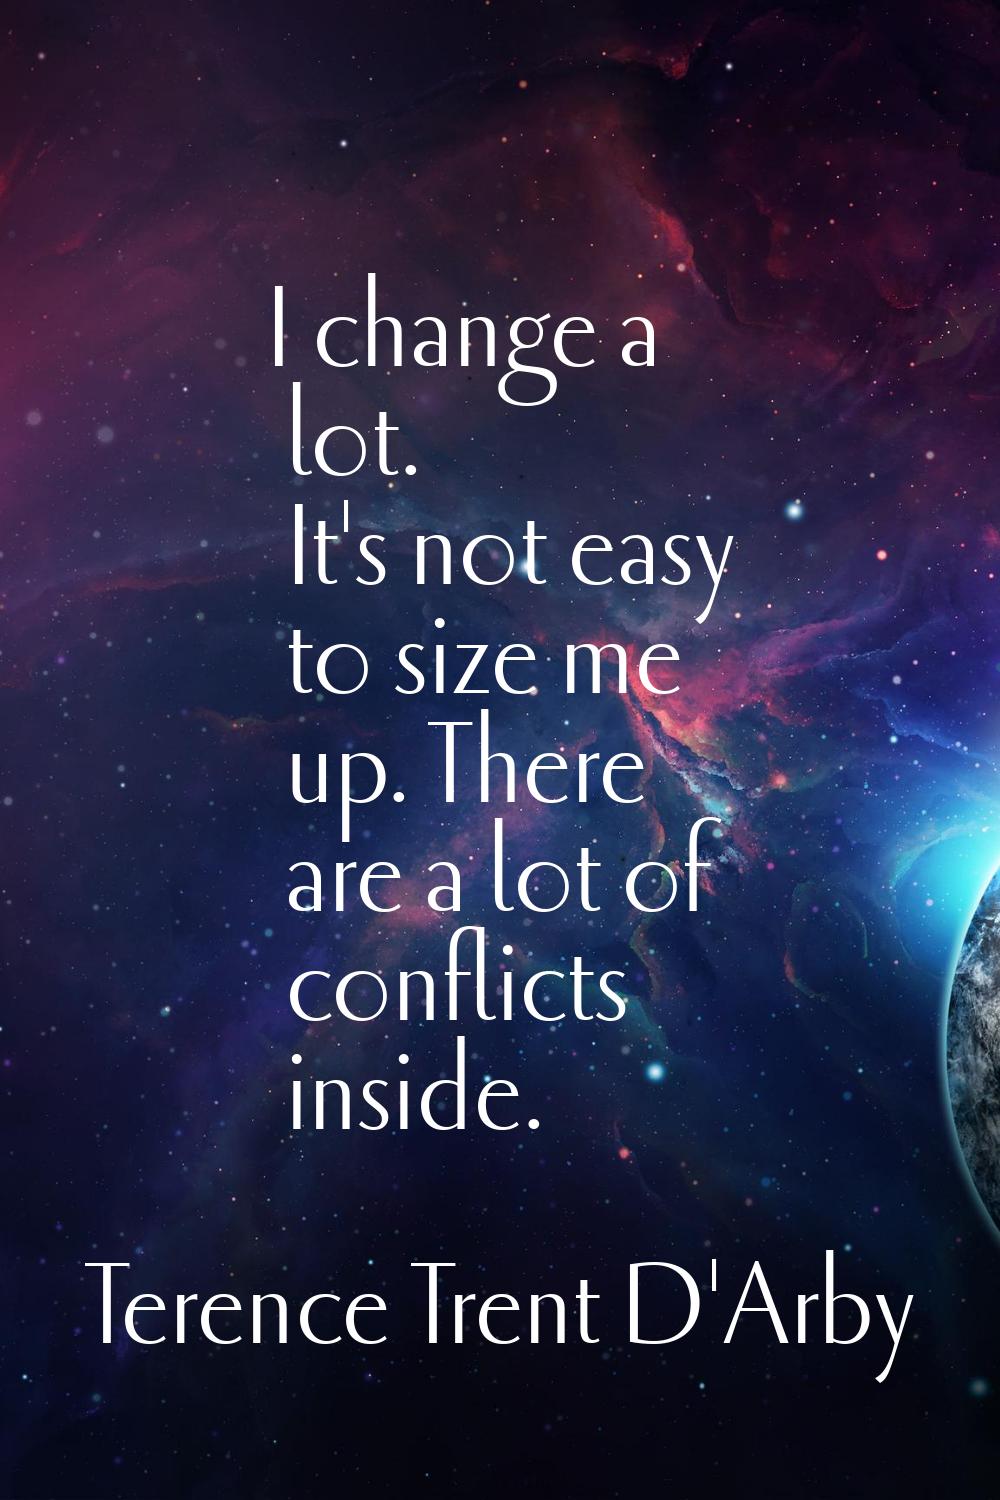 I change a lot. It's not easy to size me up. There are a lot of conflicts inside.